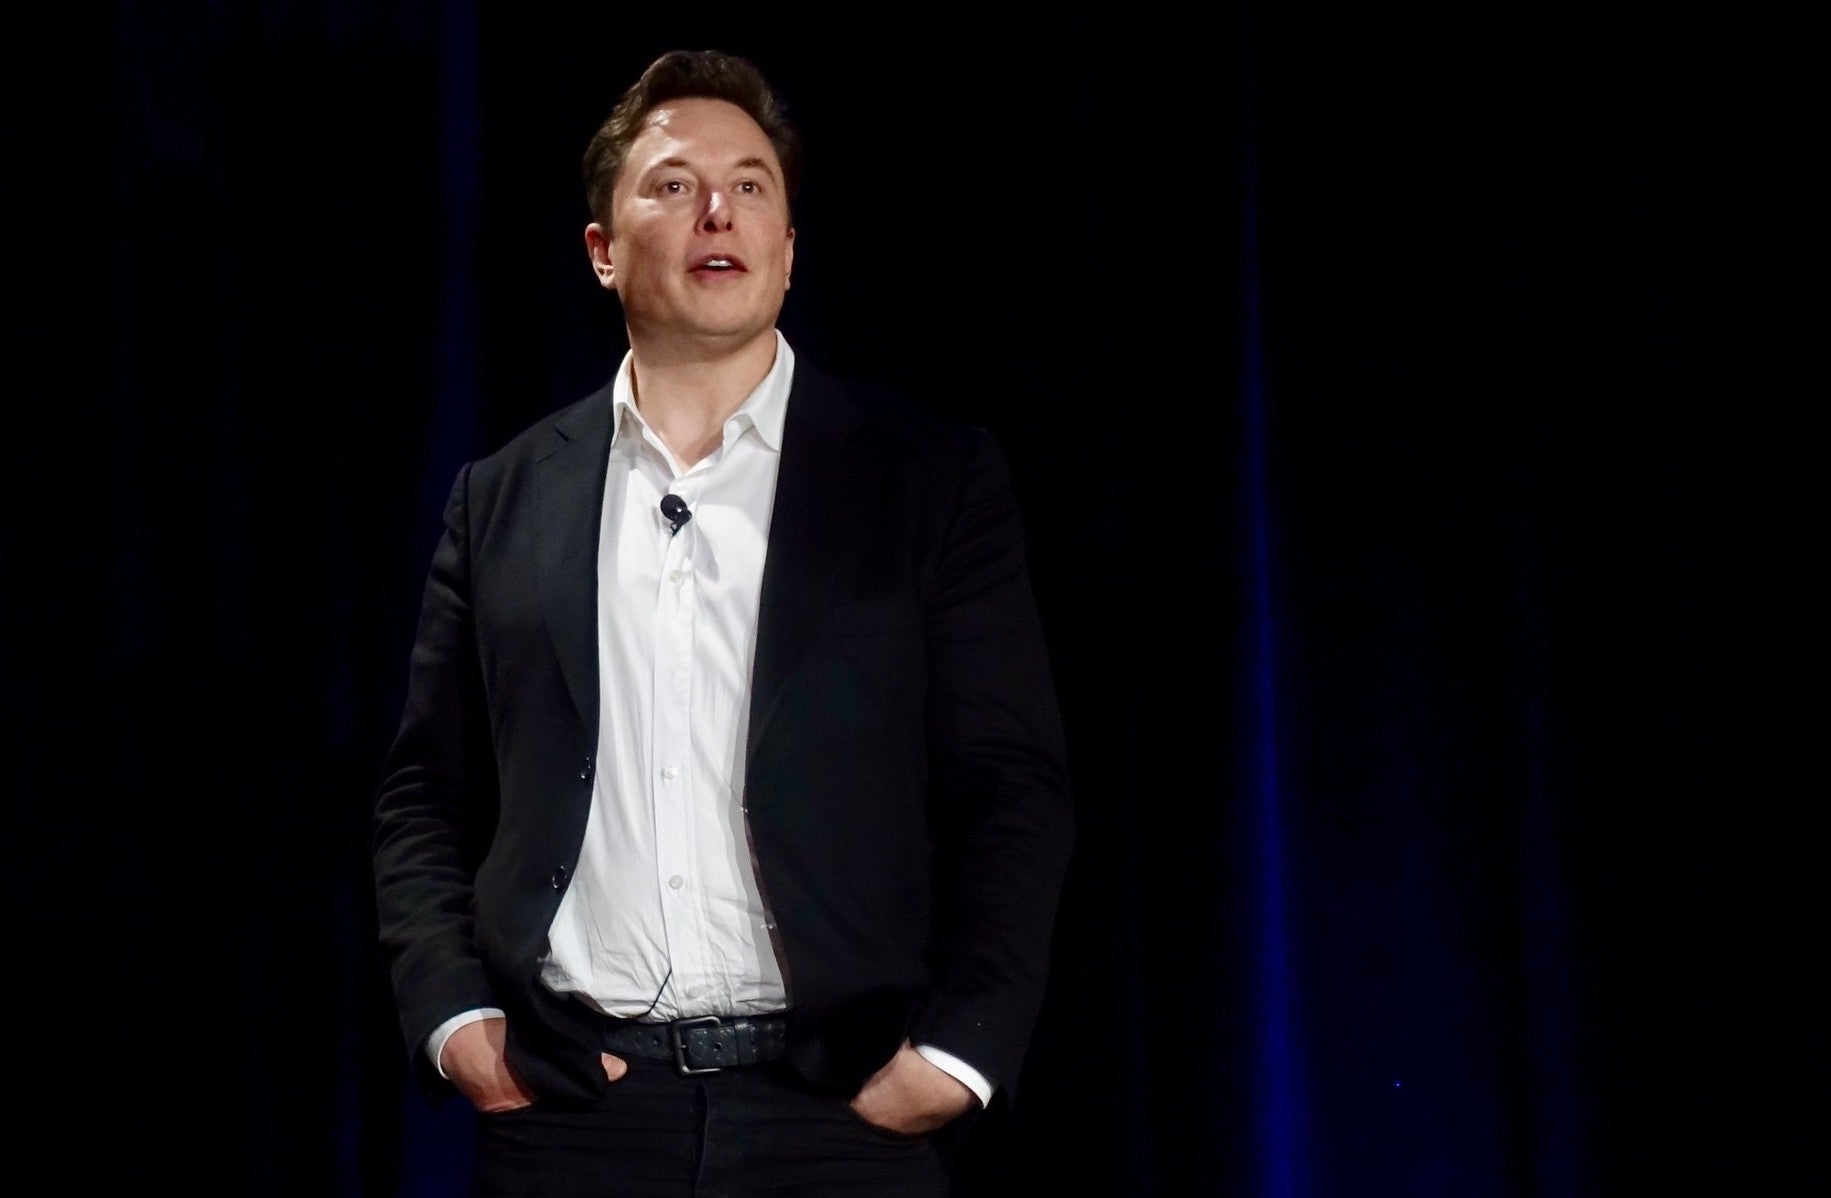 The Internet Is Saturated With Tesla's Elon Musk, But Why?